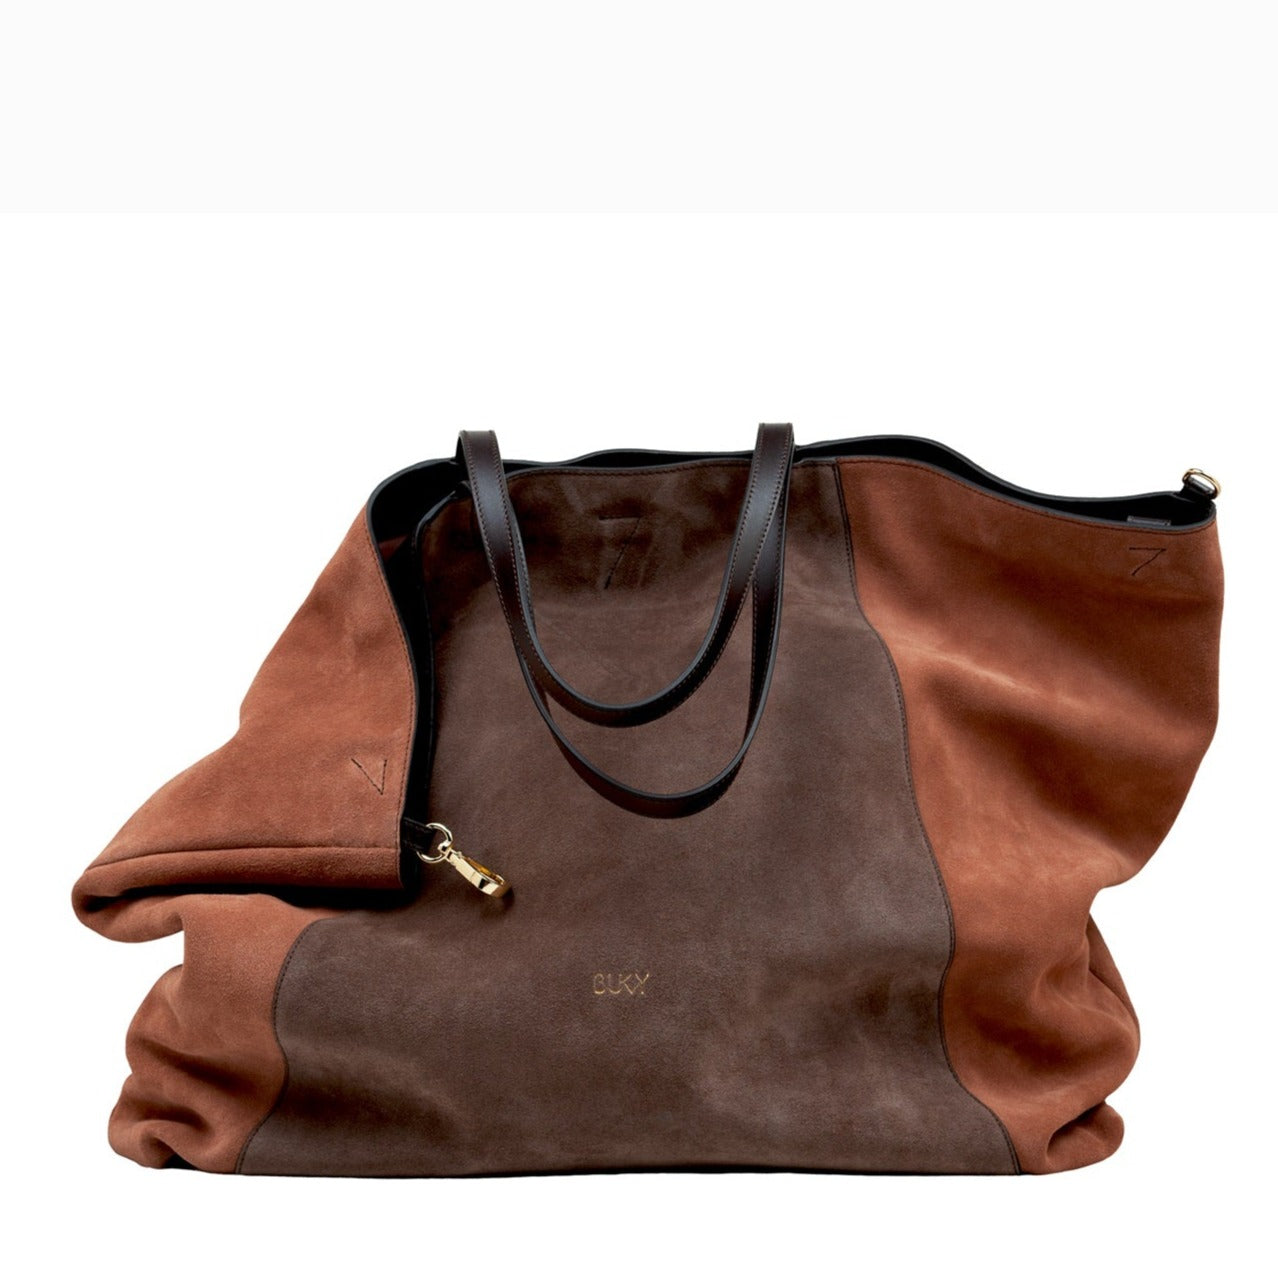 Maxi bag in brown suede, backpack, handbag and tote in one I Bukvy